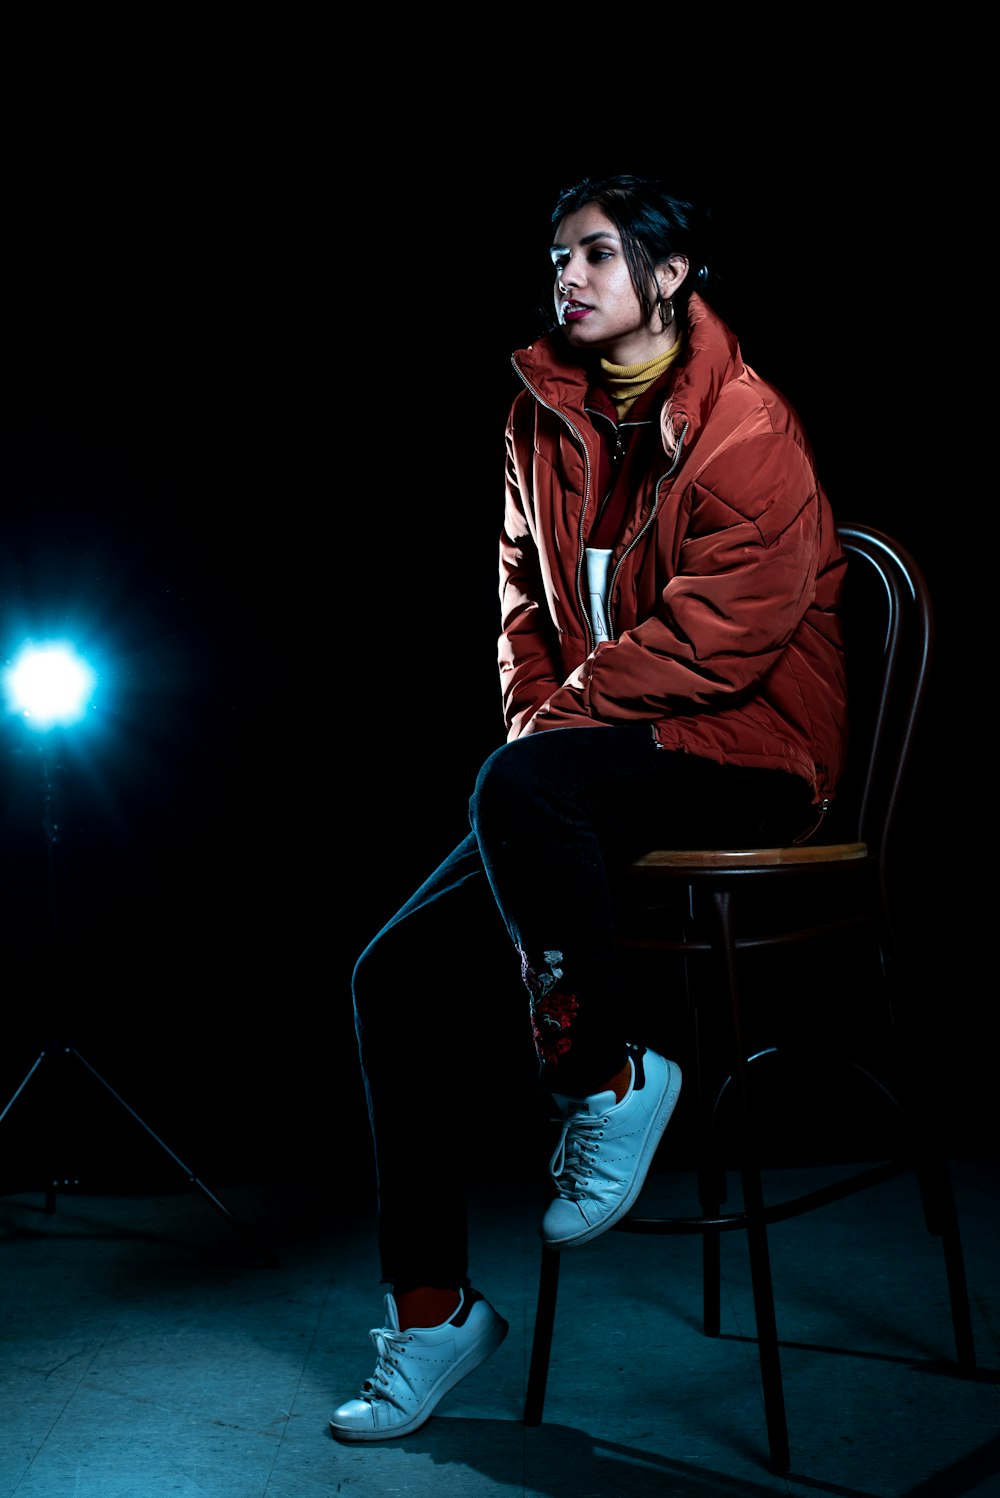 man in red jacket sitting on chair